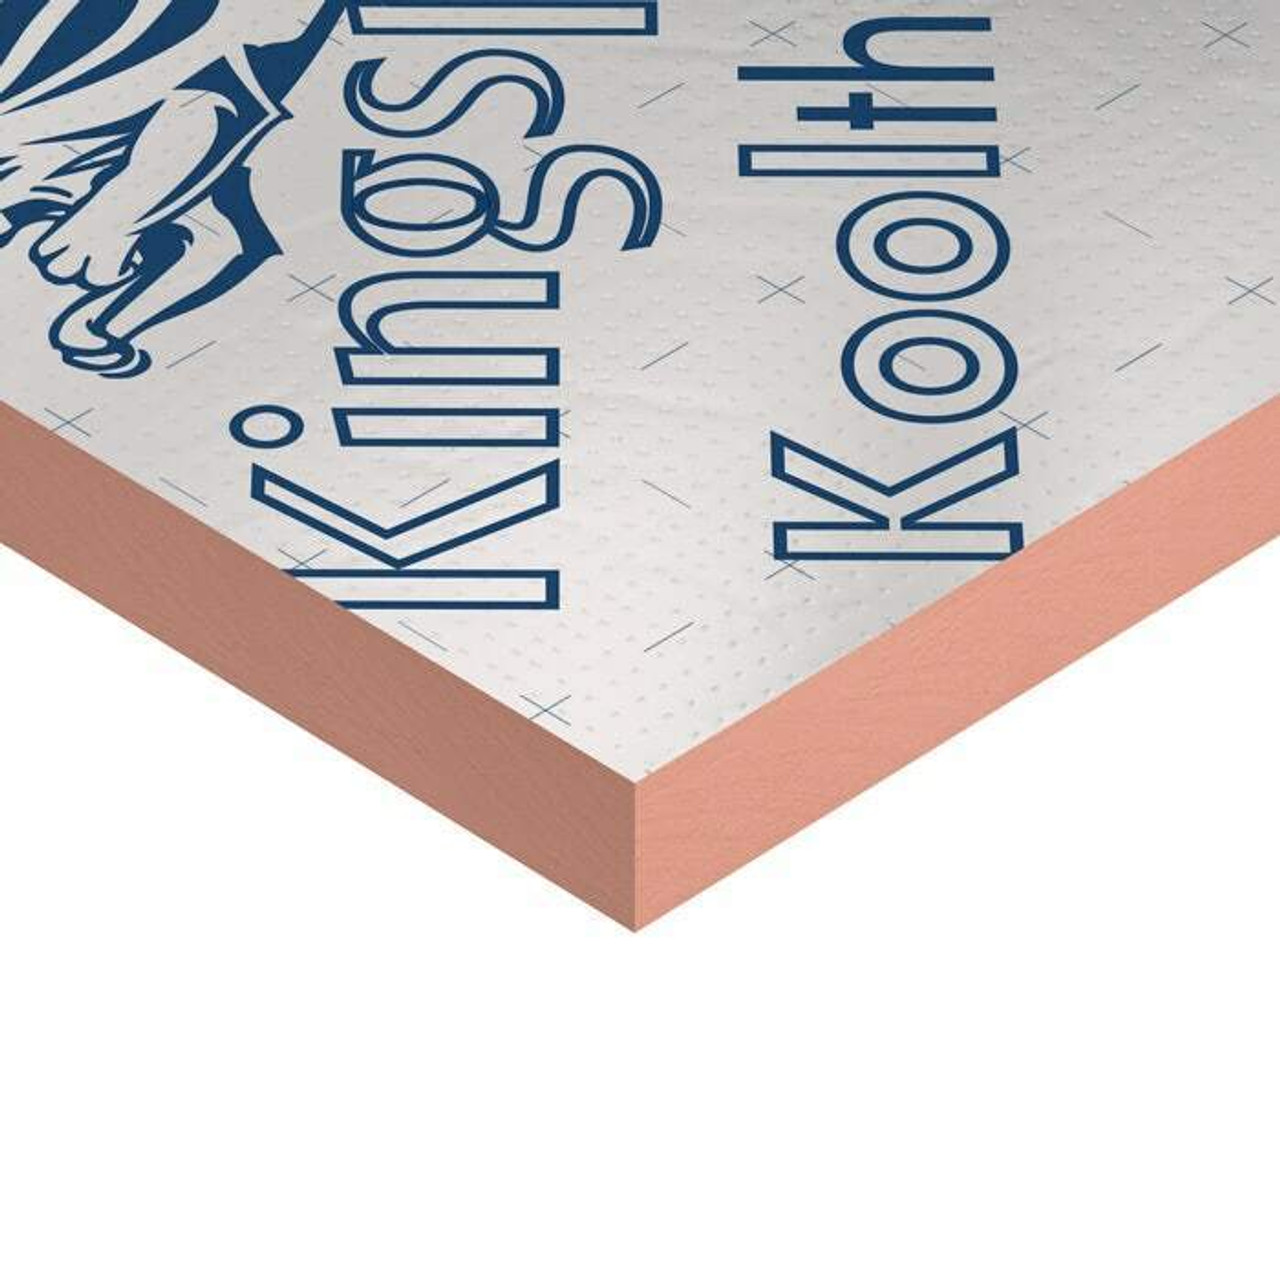 75mm- Kingspan Kooltherm K107 Phenolic Pitched Roof Insulation Board 2400 X 1200 X 75mm - Pack of 4 Sheets K107-75 KGS-50941